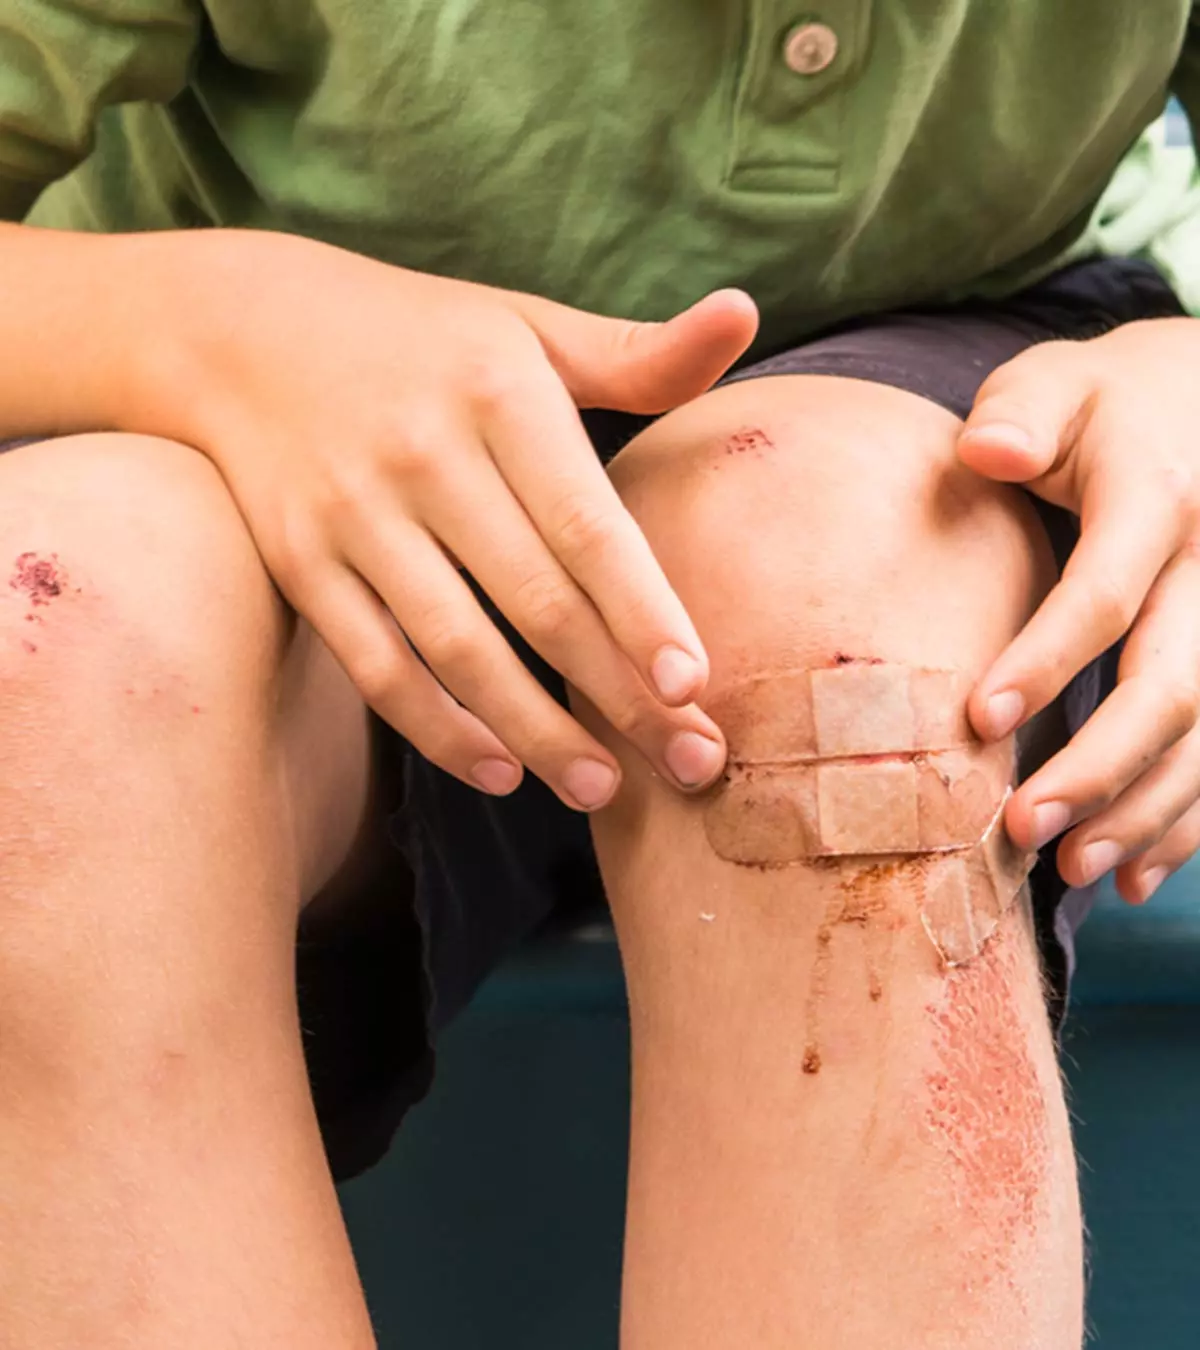 Abnormal Bruising In Children: Signs, Causes And Treatments_image